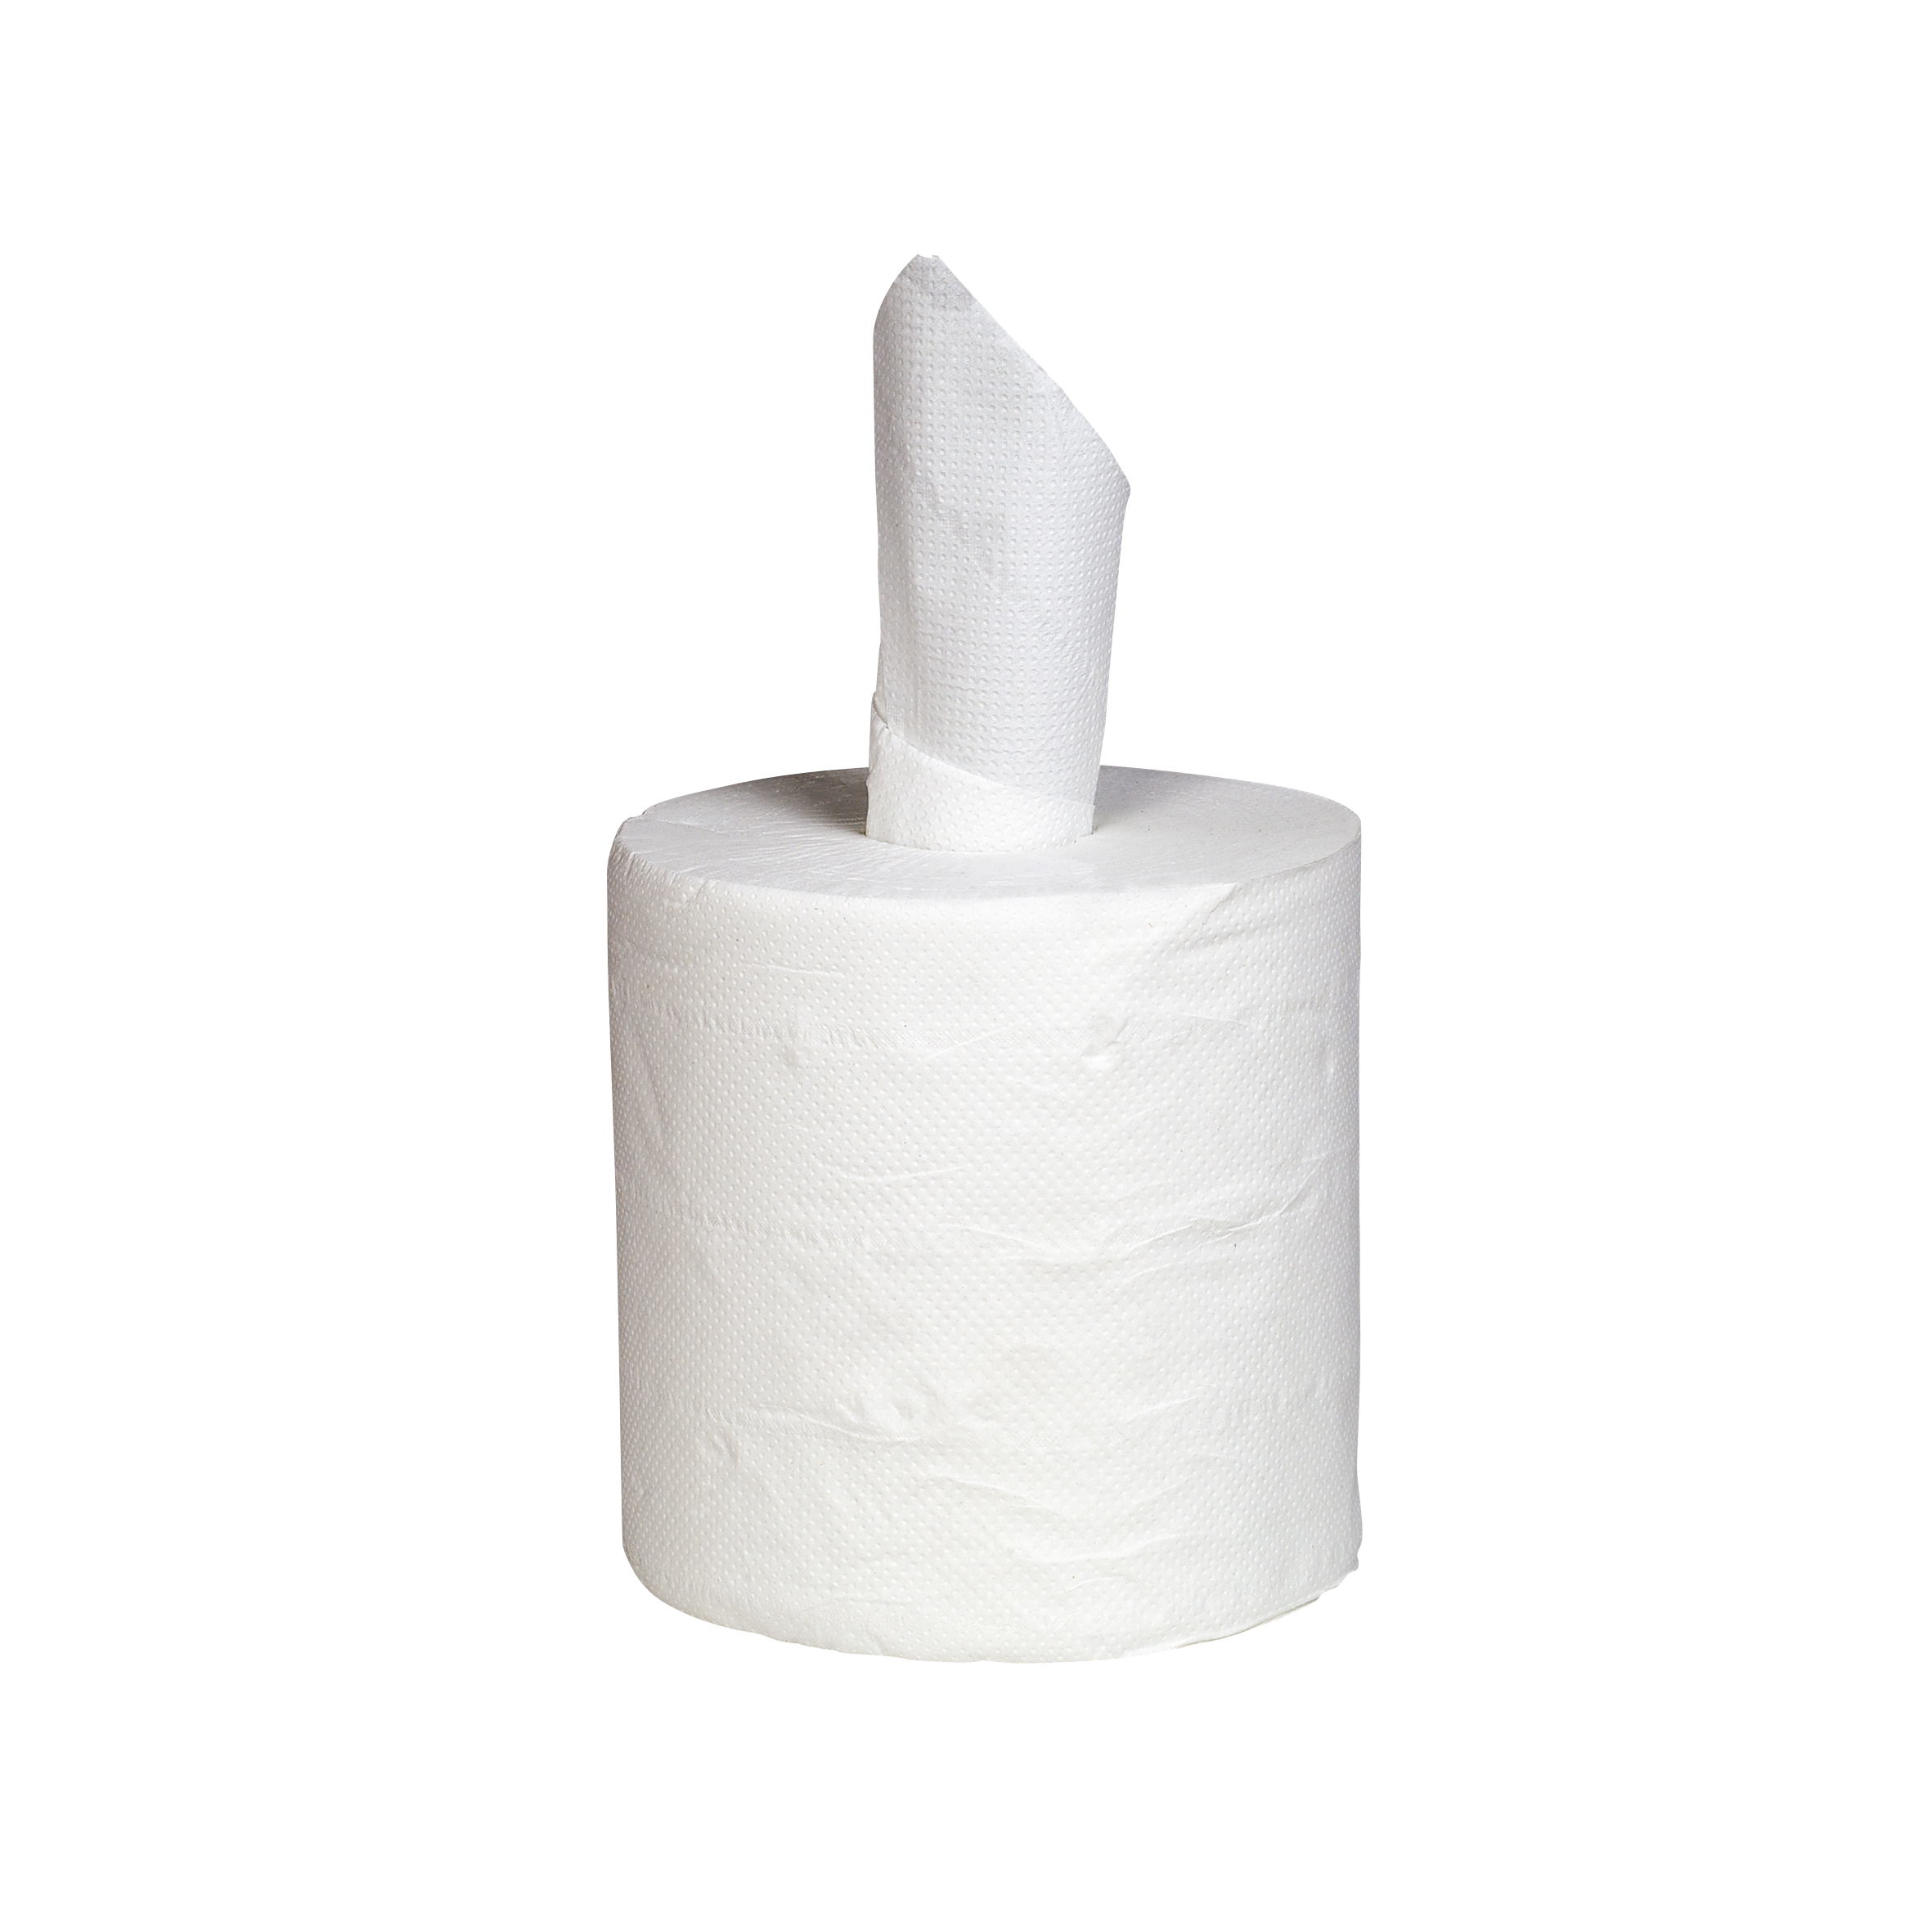 6 White 2 Ply Centre Feed Wiper Rolls